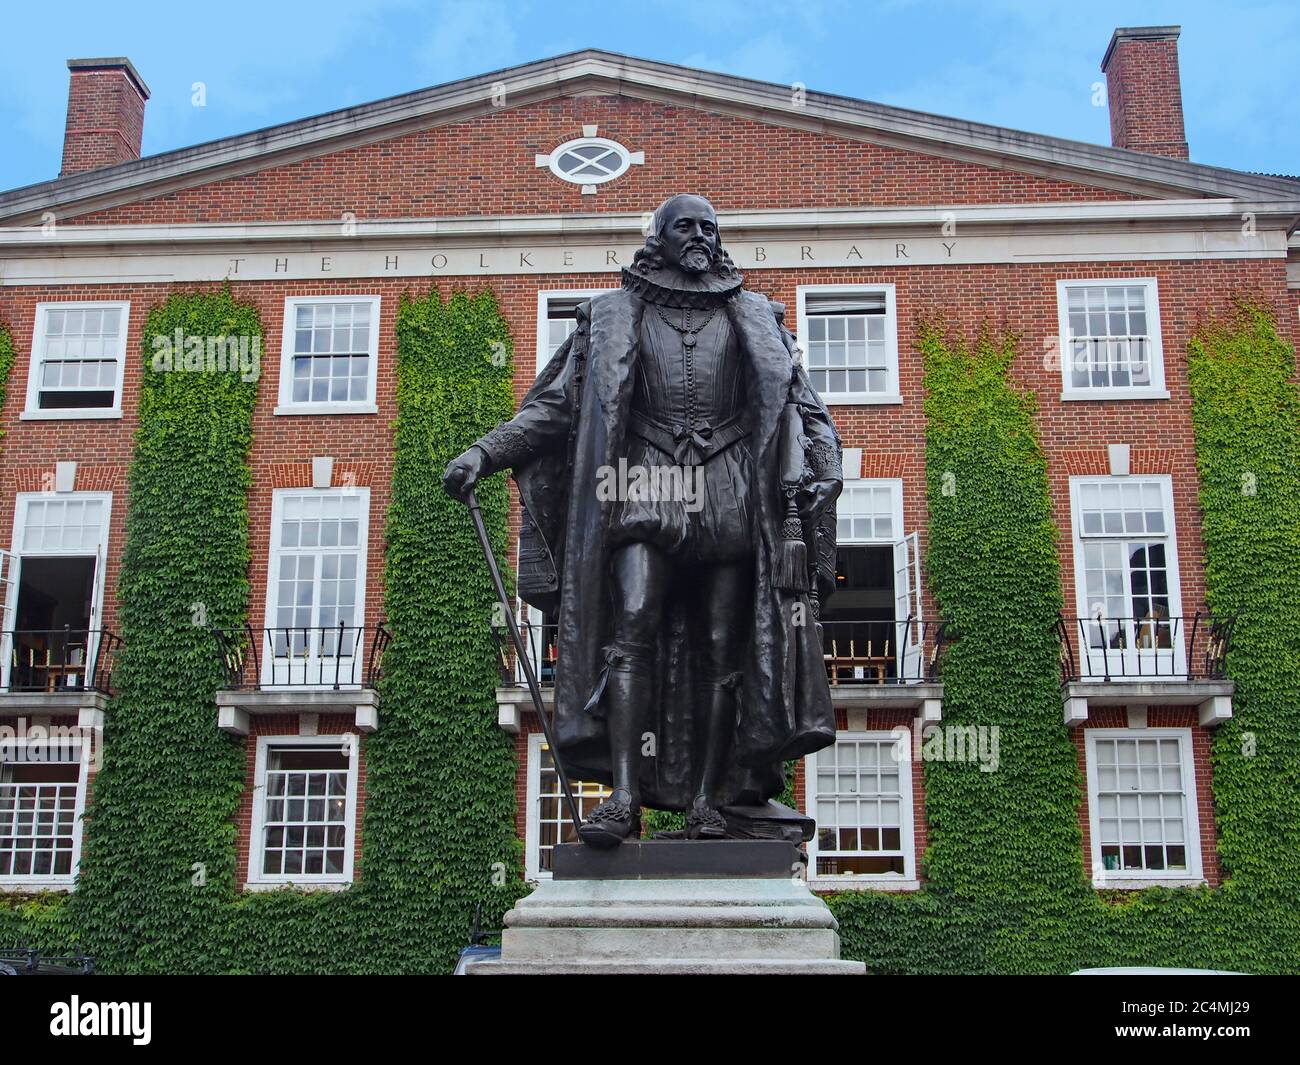 London, UK - July 29, 2013:   Statue of statesman and author Francis Bacon, in the courtyard of Gray's Inn, where he was educated as a barrister. Stock Photo